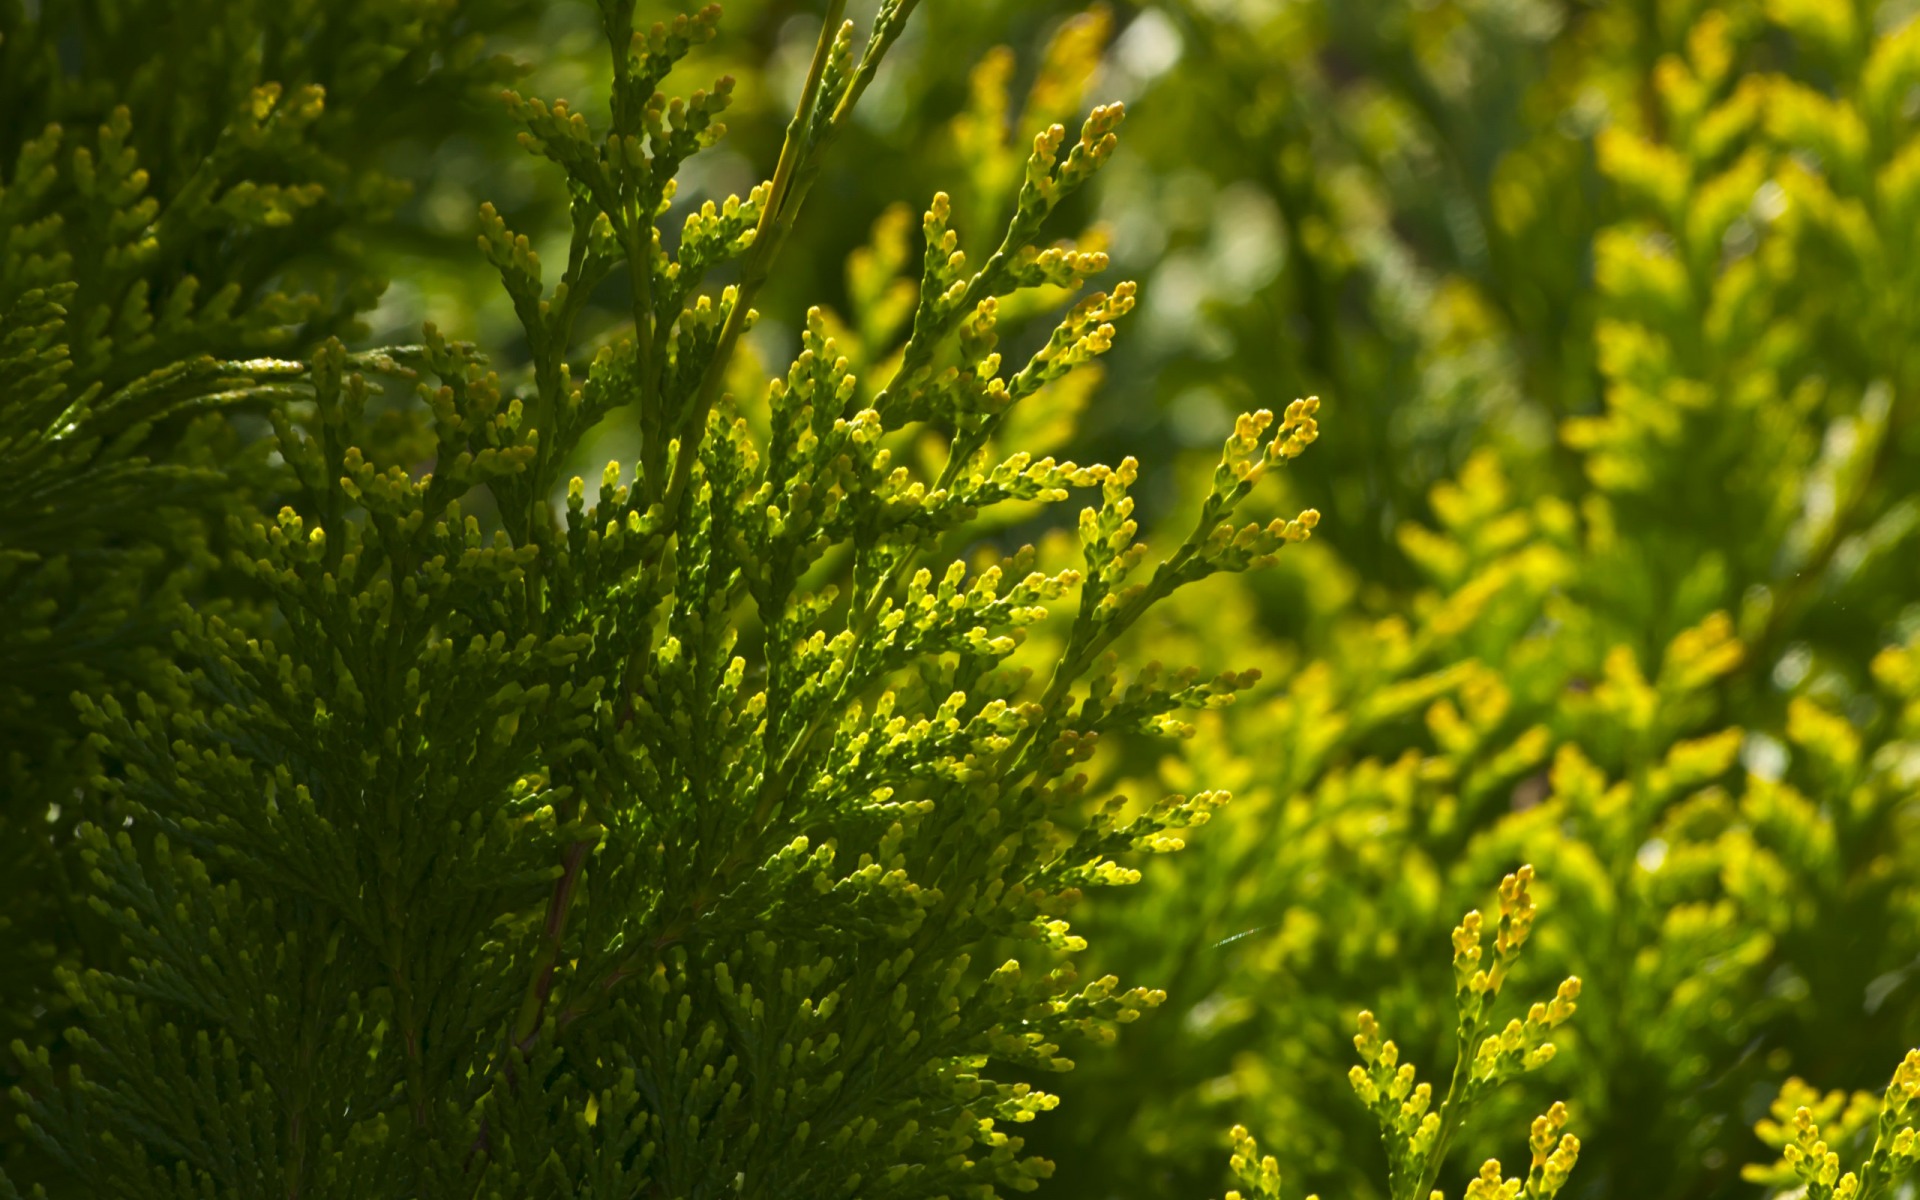 Cypress Wallpaper Plants Nature In Jpg Format For